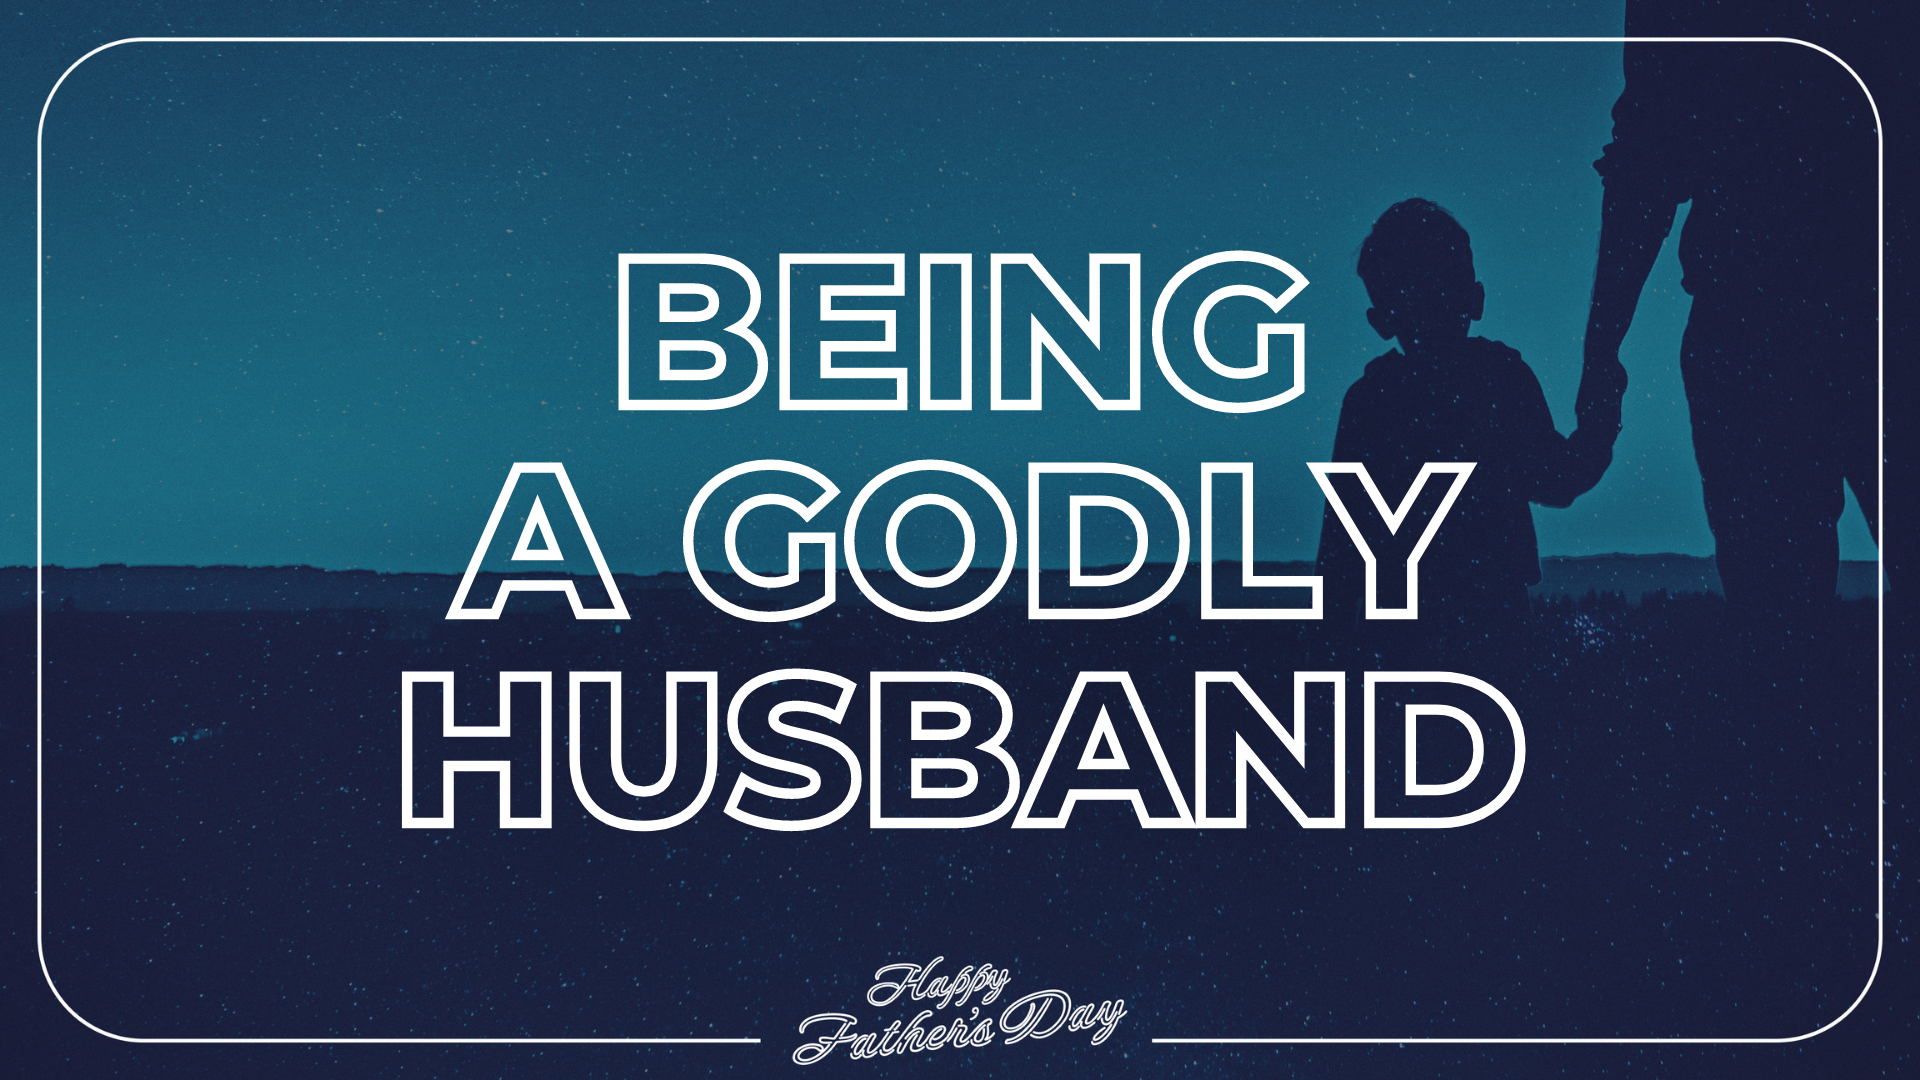 Being A Godly Husband